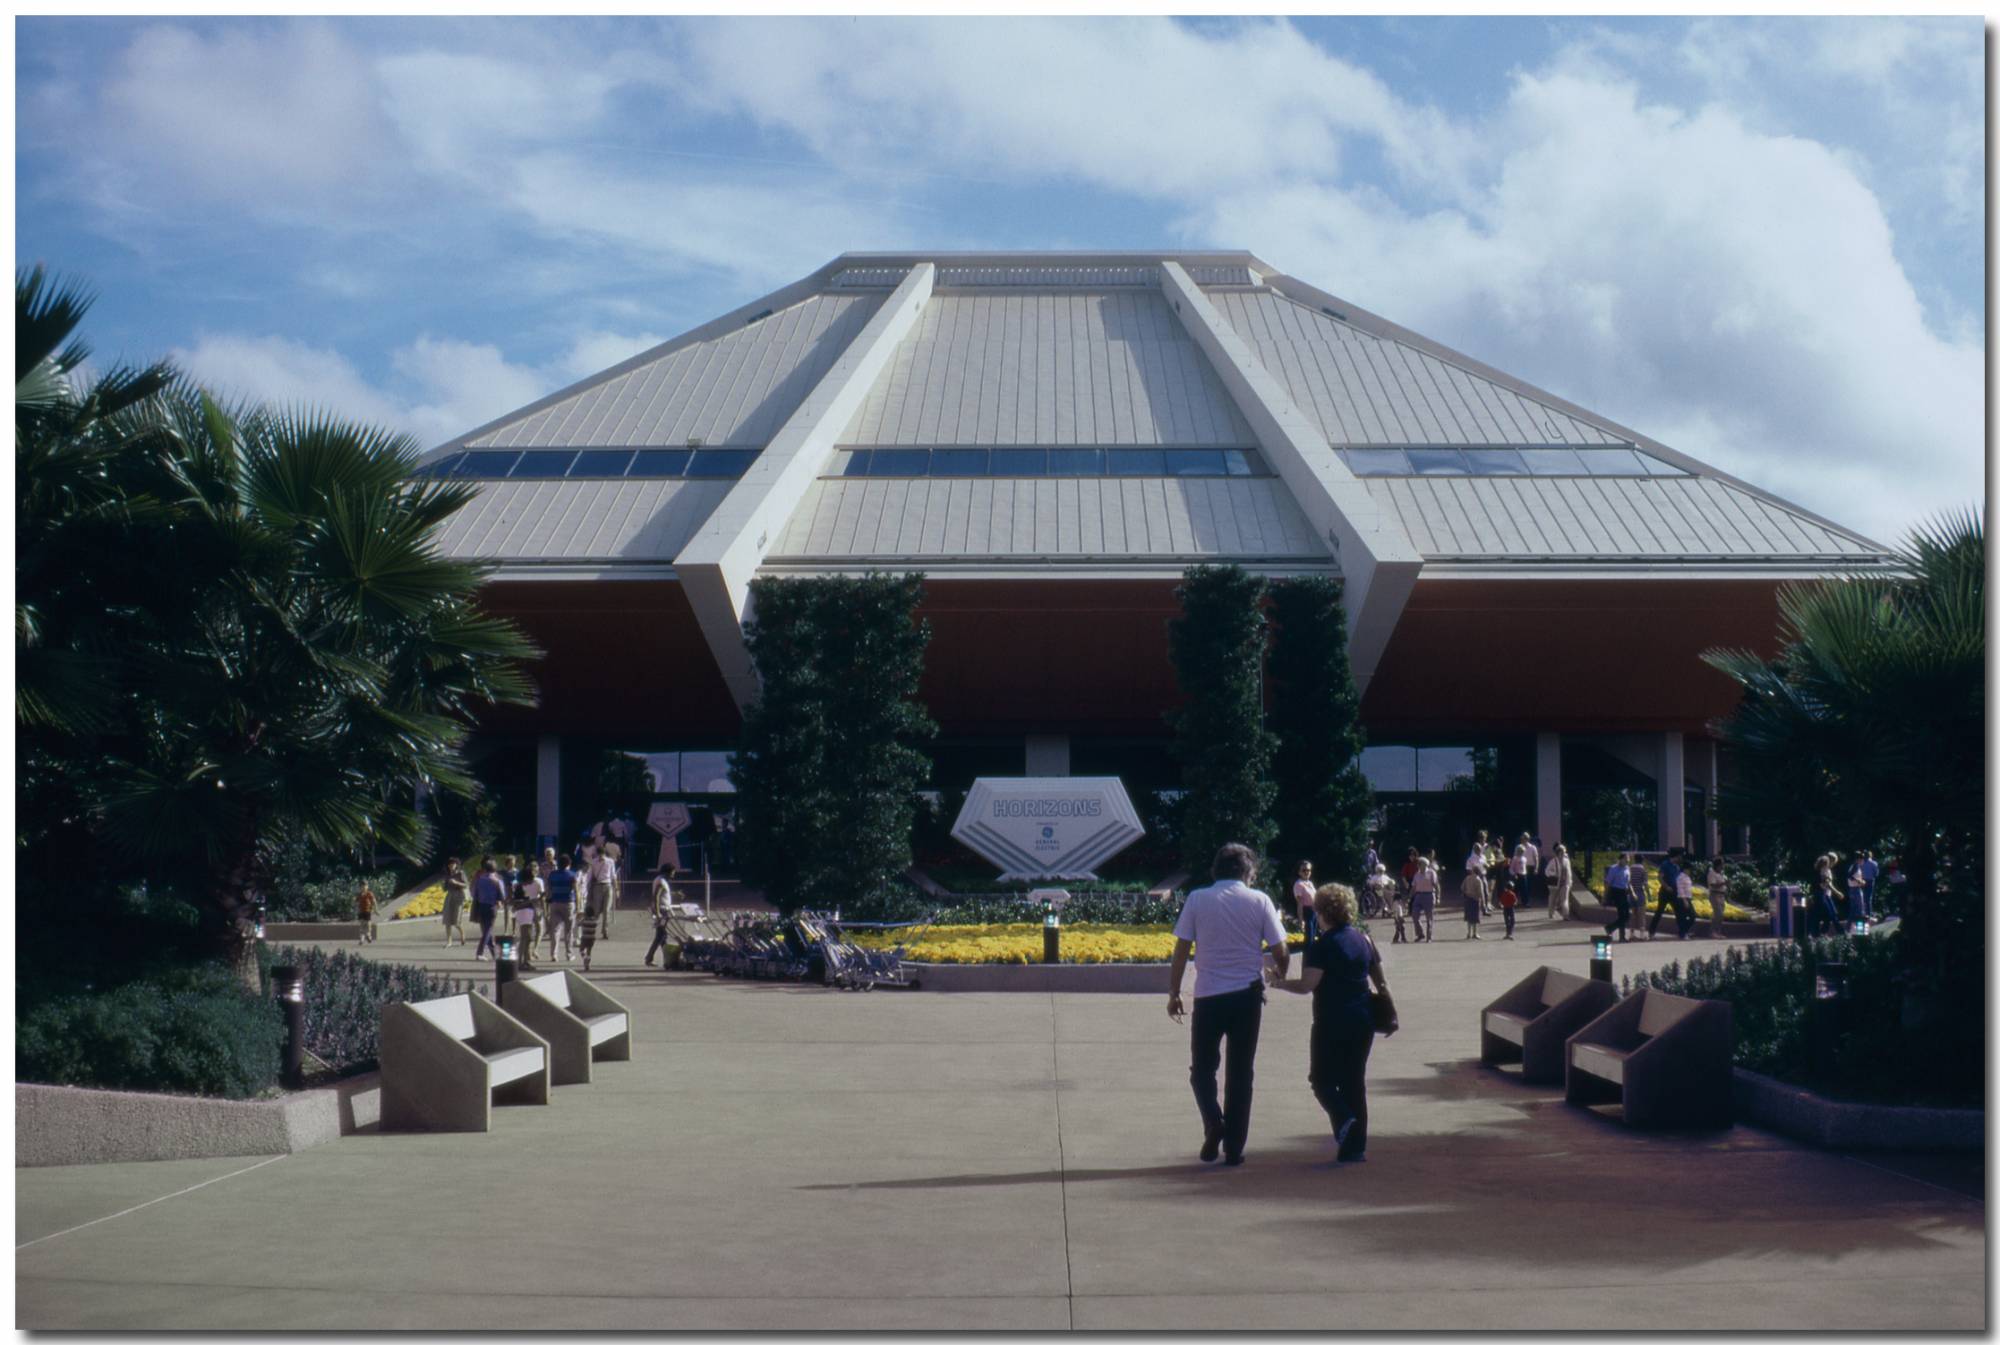 Travel back in time to Horizons, World of Motion, and Journey Into Imagination at Epcot | PassPorter.com